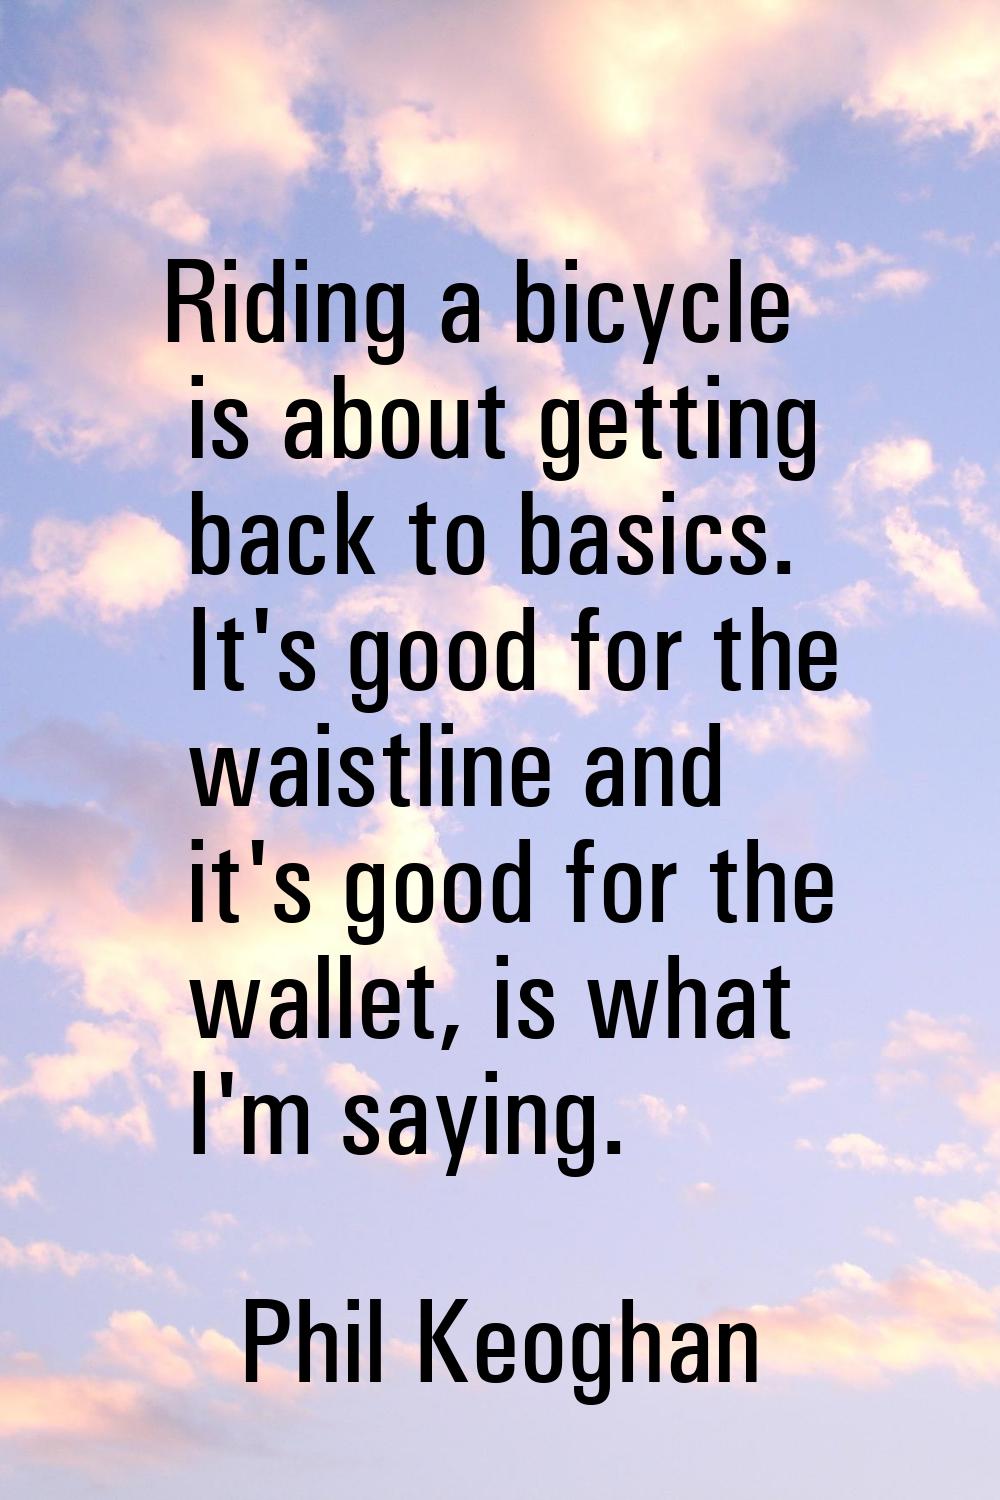 Riding a bicycle is about getting back to basics. It's good for the waistline and it's good for the